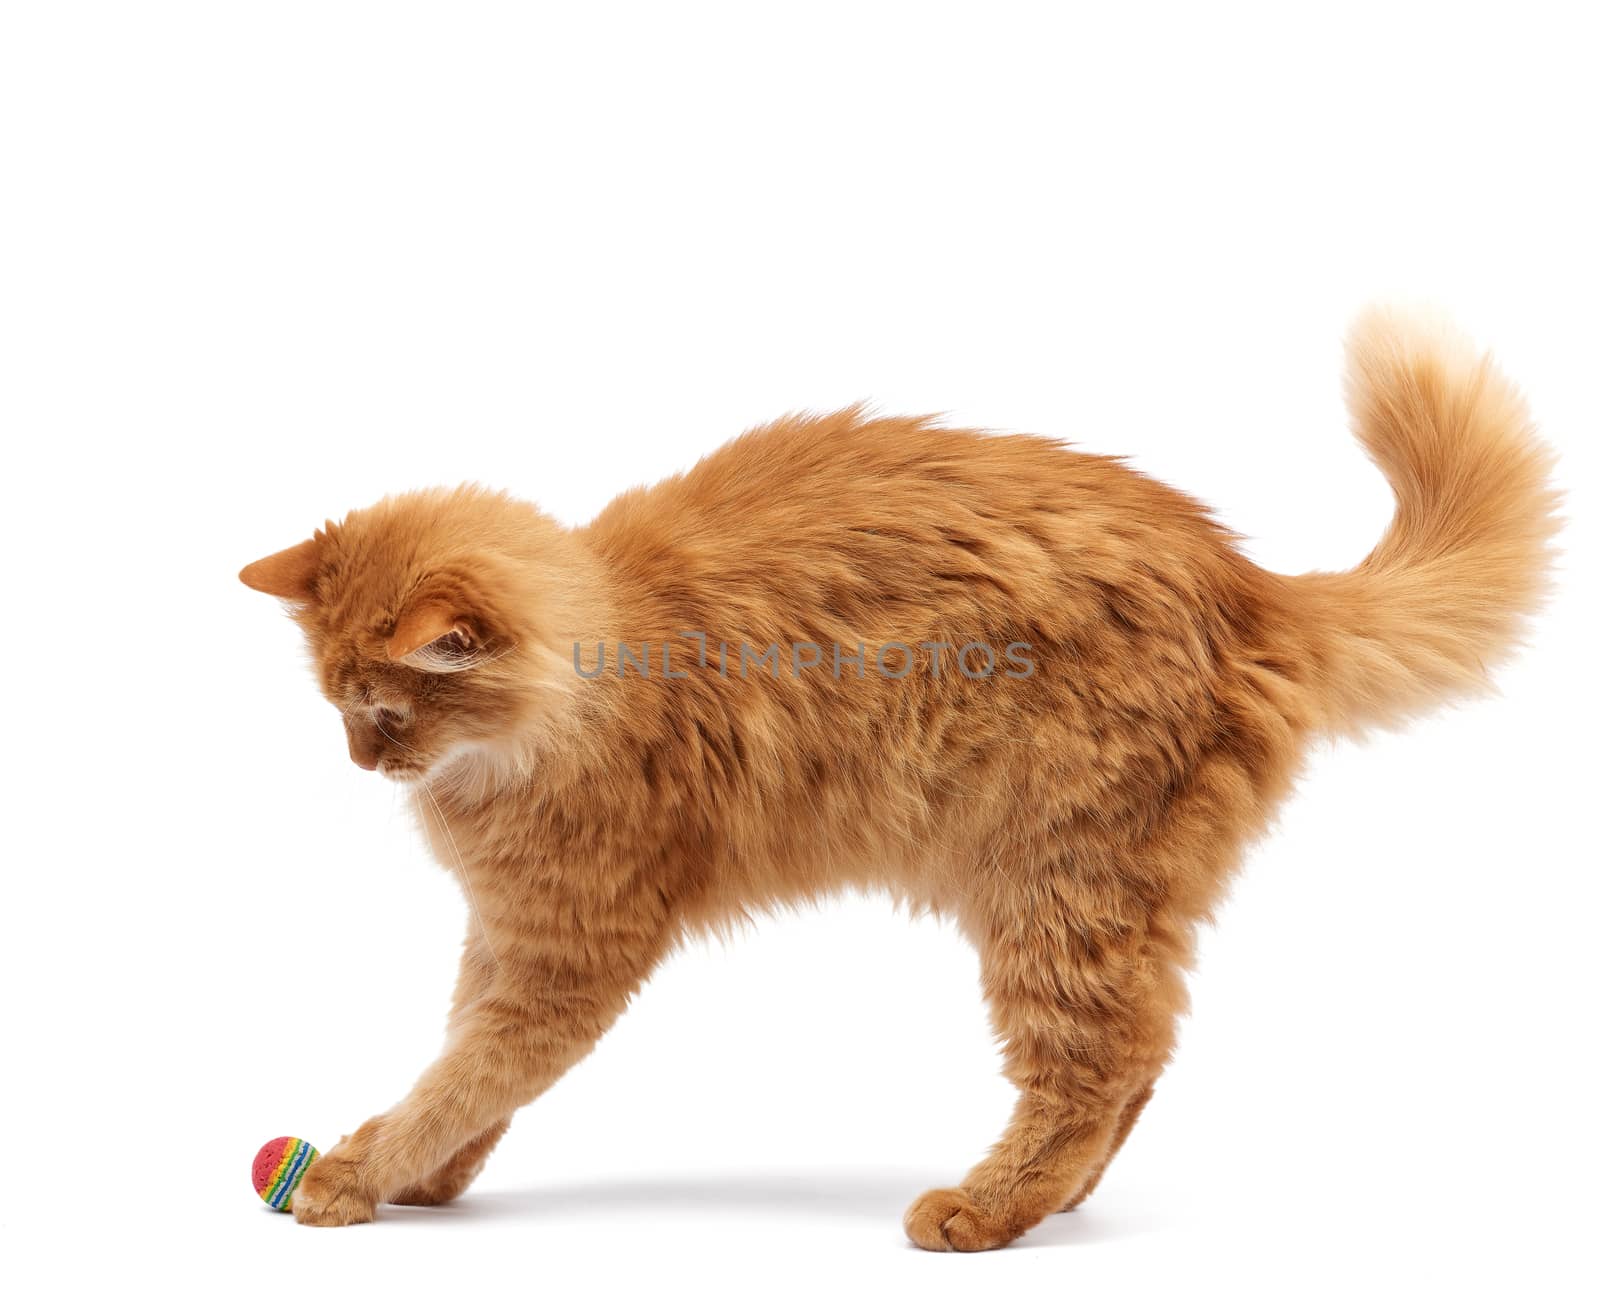 adult fluffy red cat plays with a red ball on a white background, cute animal isolated on a white background